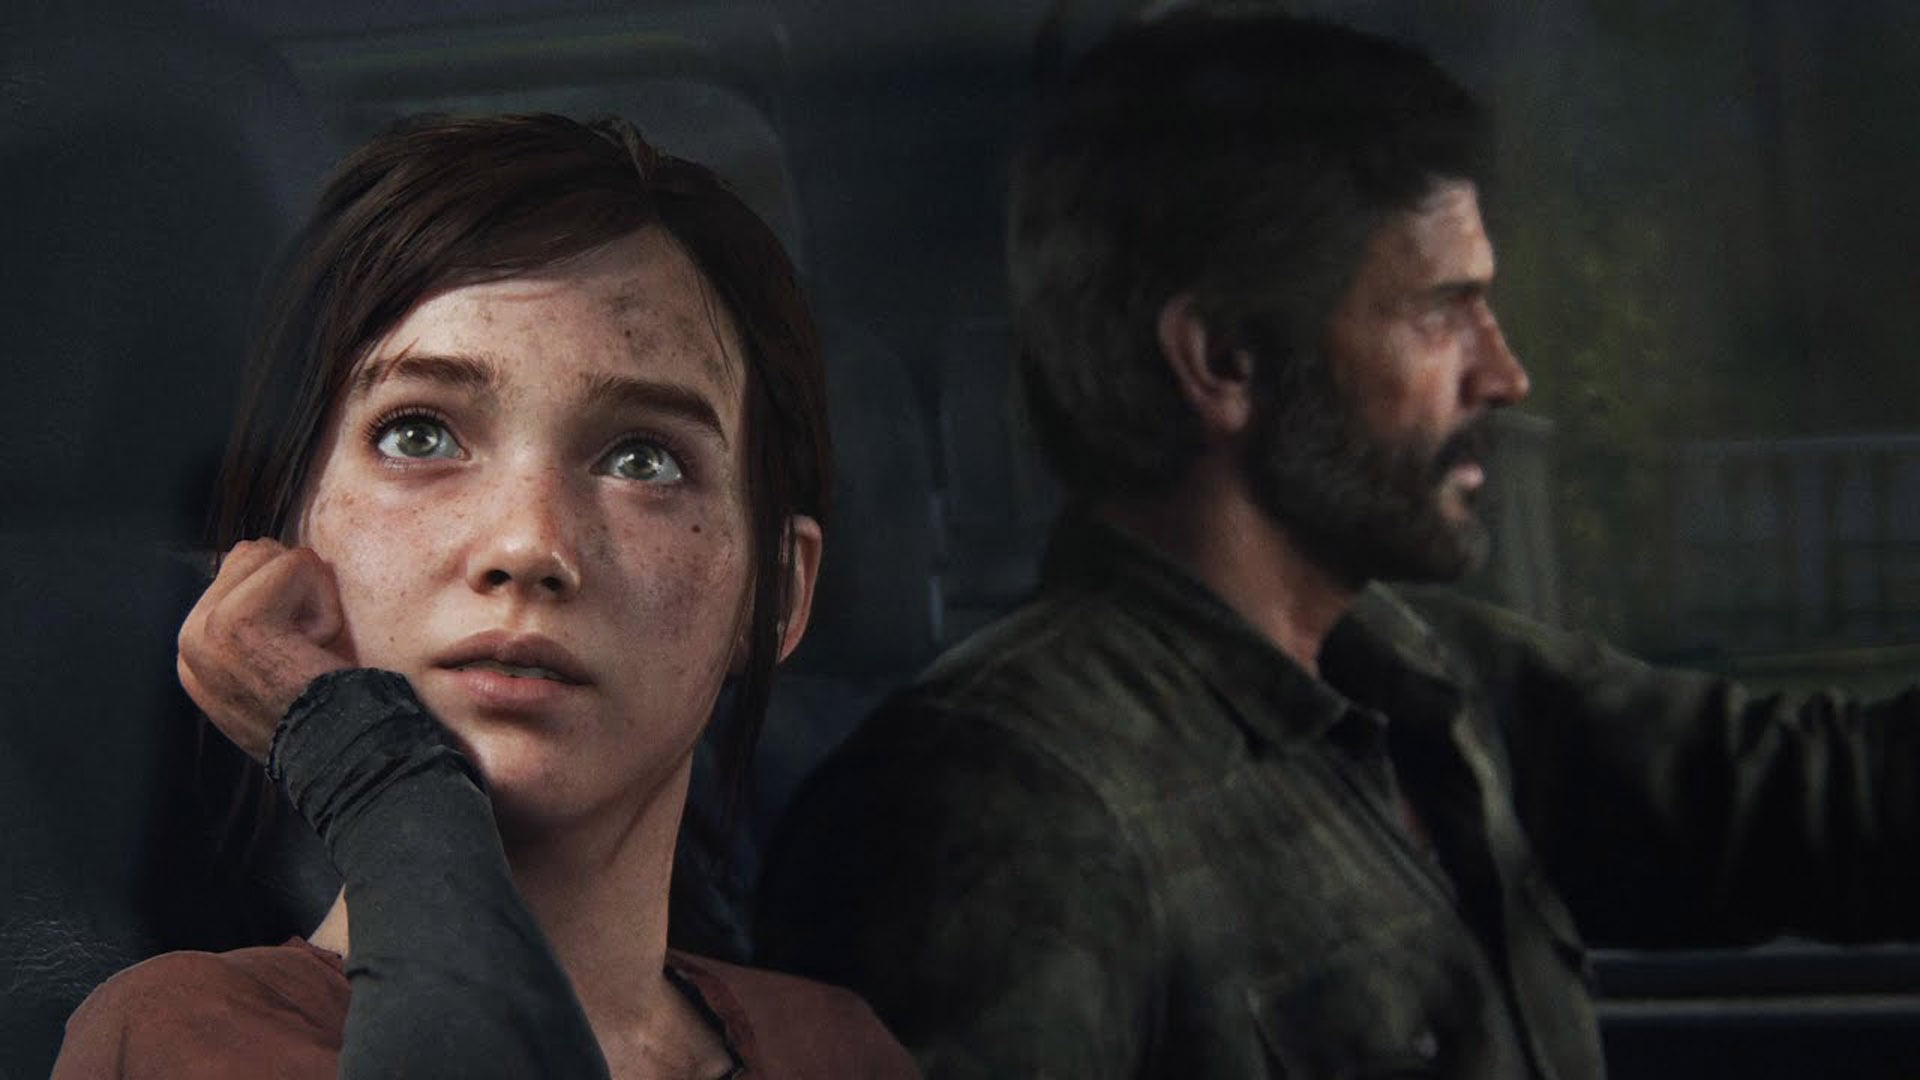 In-depth exploration of emotional narrative in The Last of Us Part 1